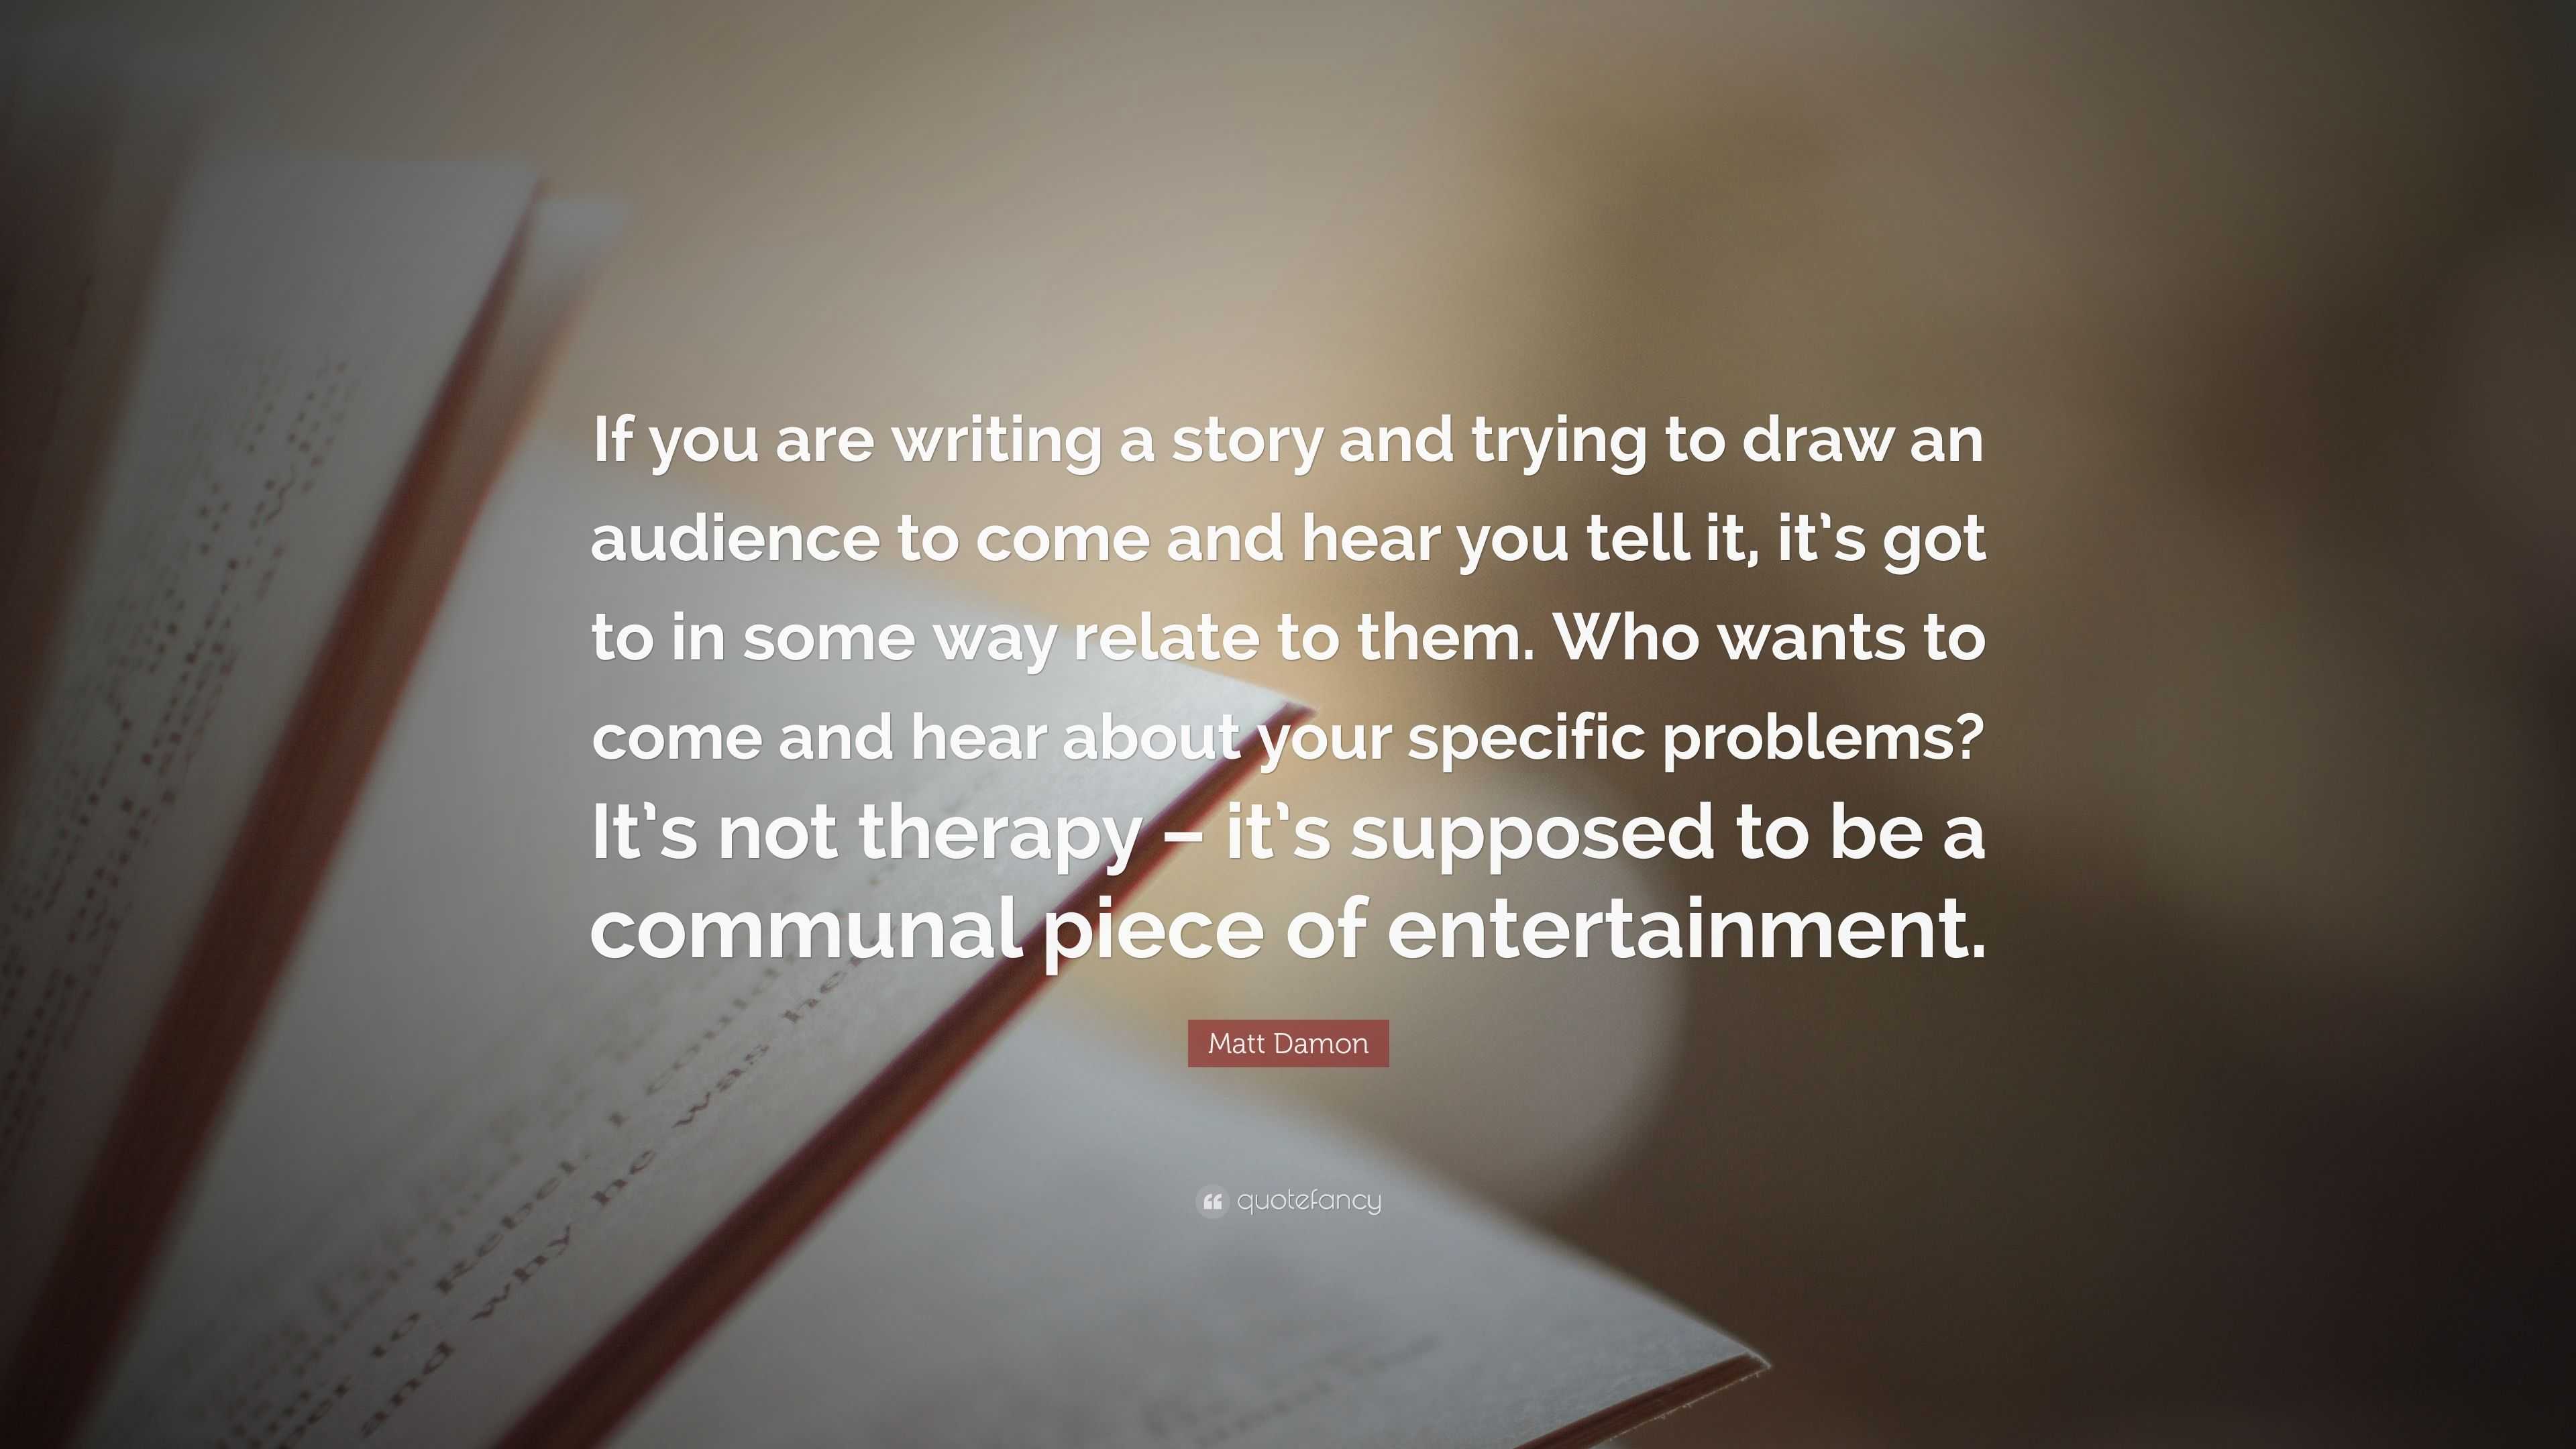 Matt Damon Quote: “If you are writing a story and trying to draw an ...